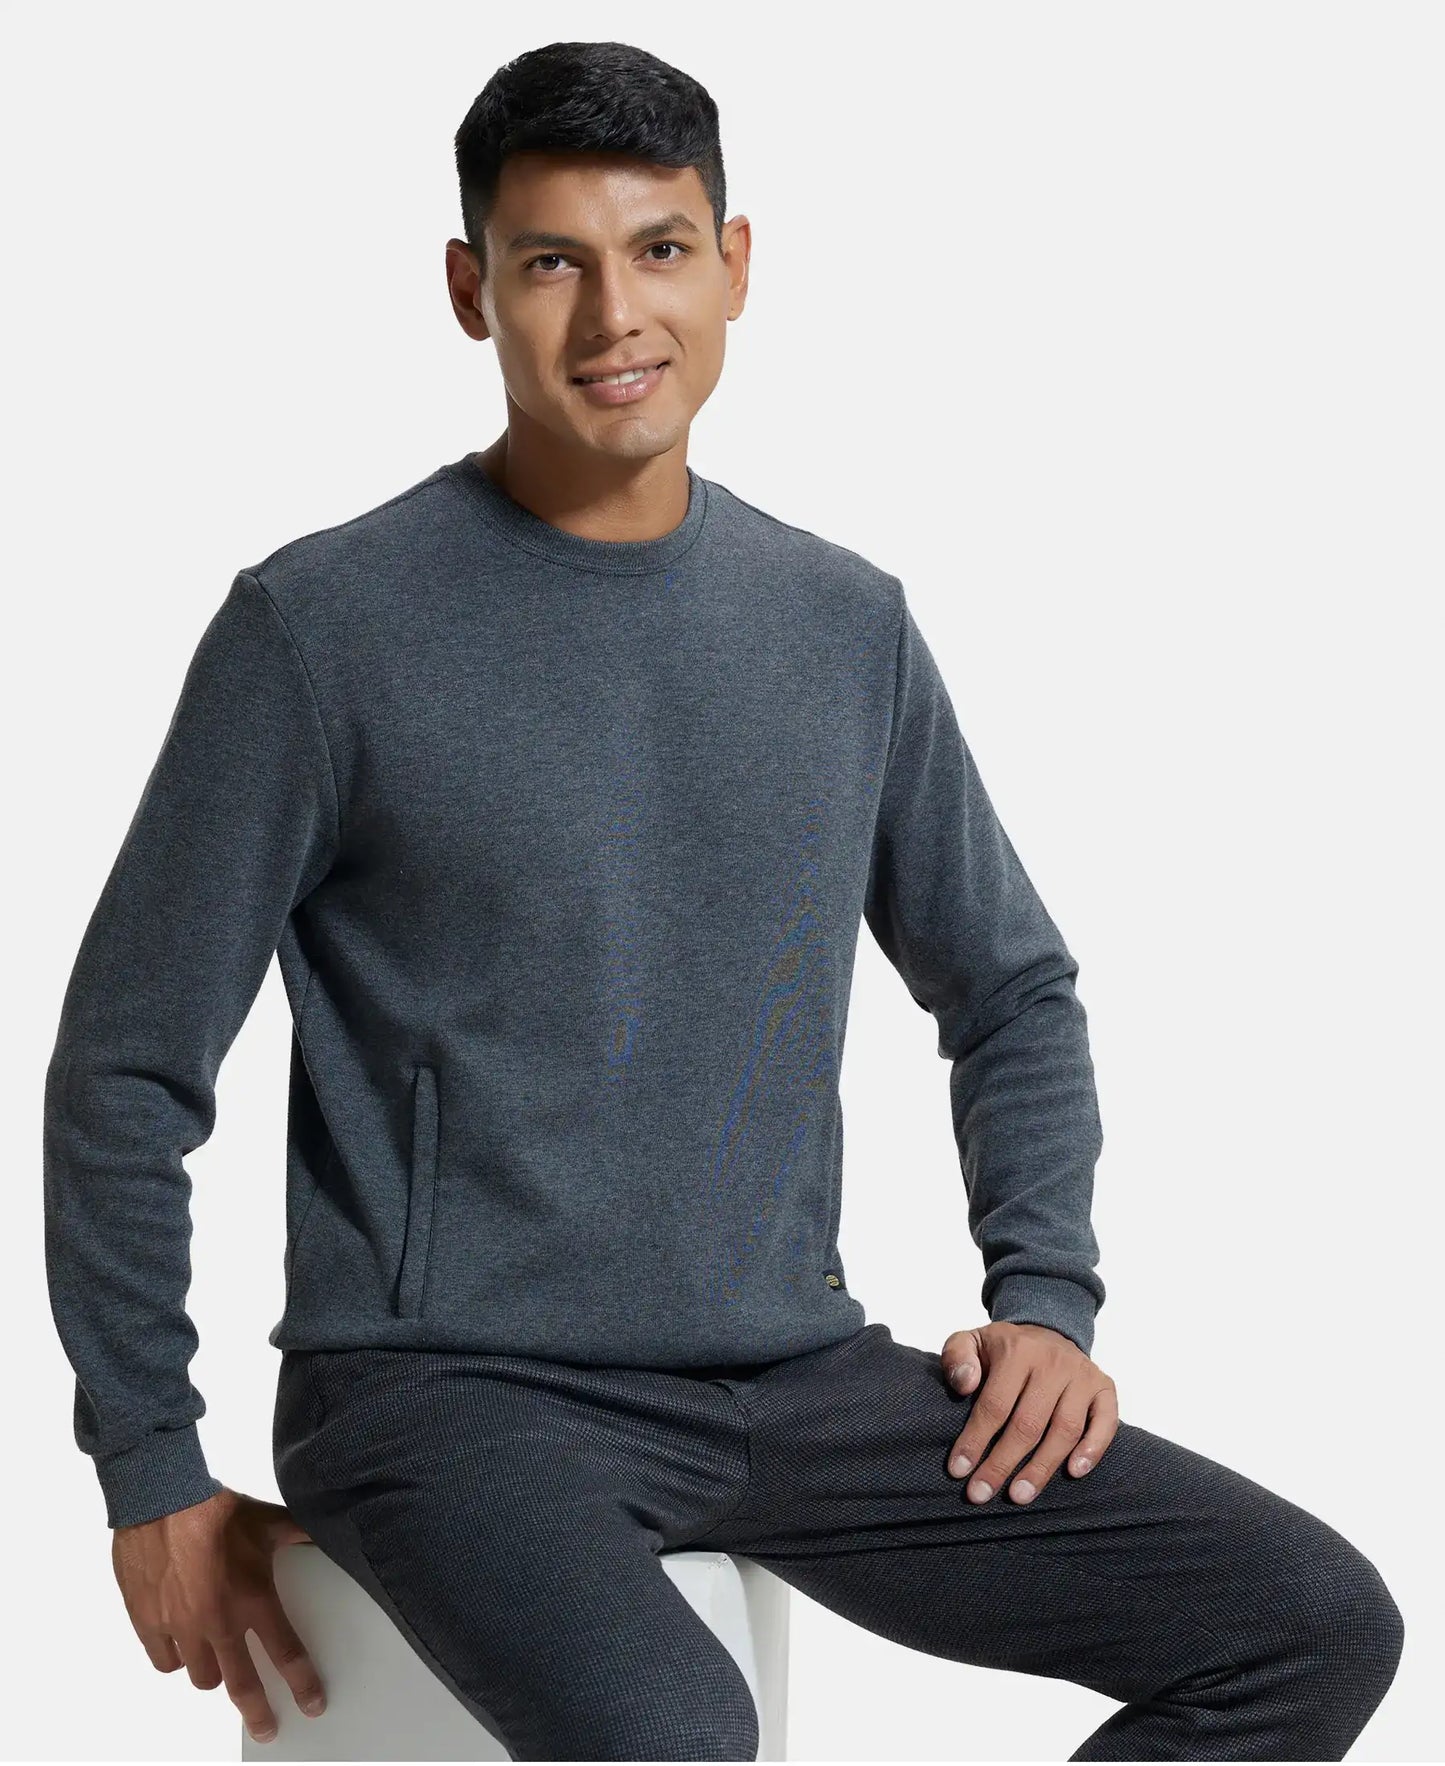 Super Combed Cotton Rich Plated Sweatshirt with Zipper Pockets - Charcoal Melange-6